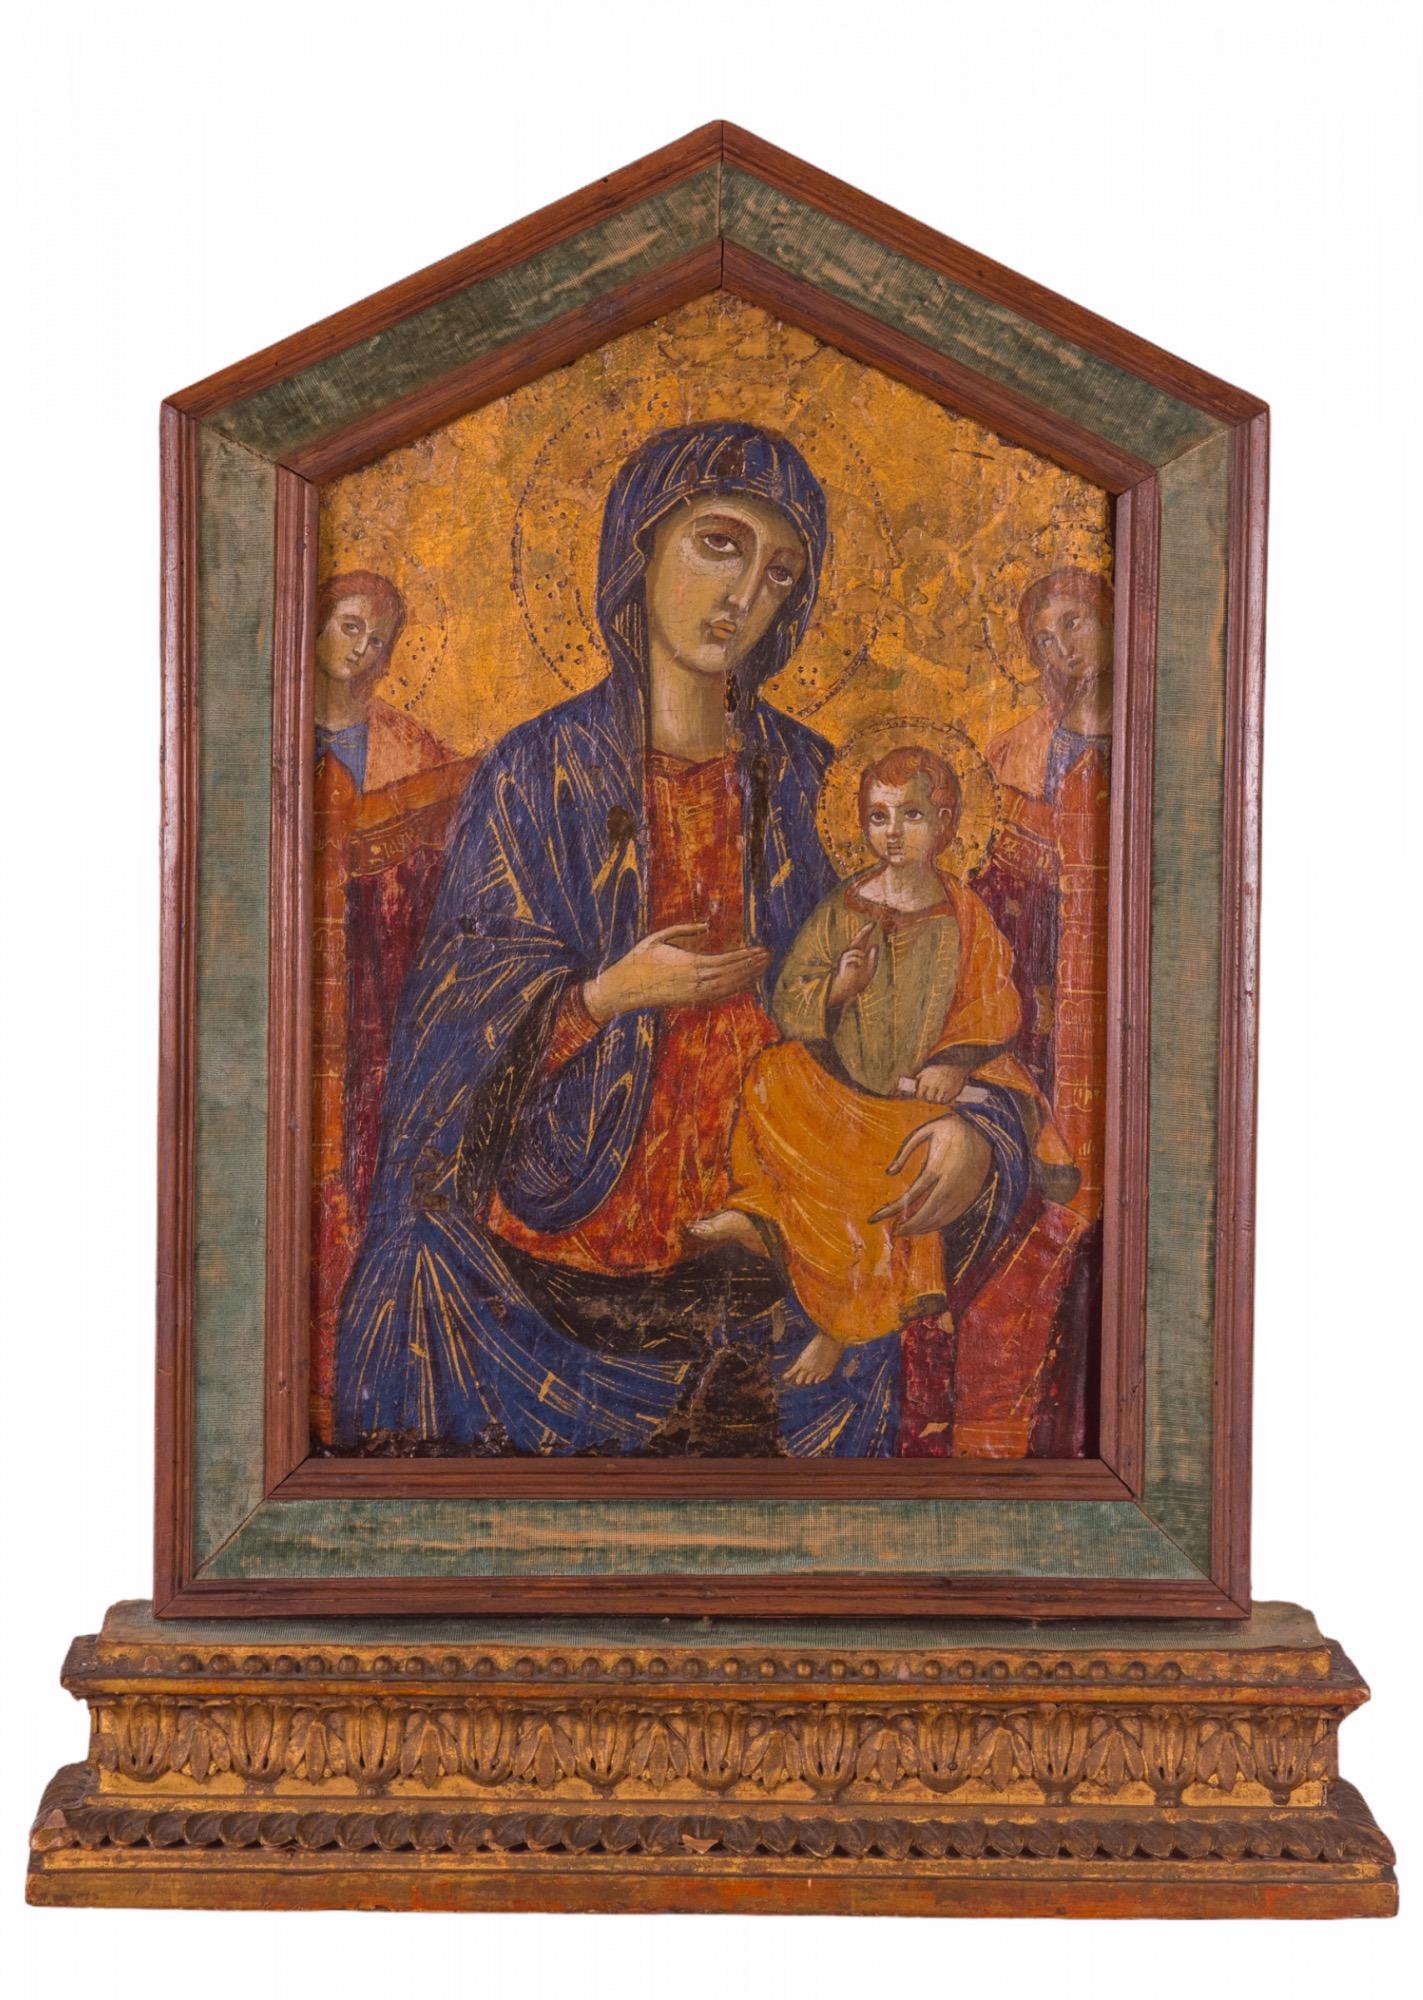 17th Century Italian polychromed and gold gilded on wood panel Sienese style painting of the Madonna Enthroned with the child and two adoring angels behind them. The halos are beautifully adorned with punch work. She is framed by a hand-carved gold